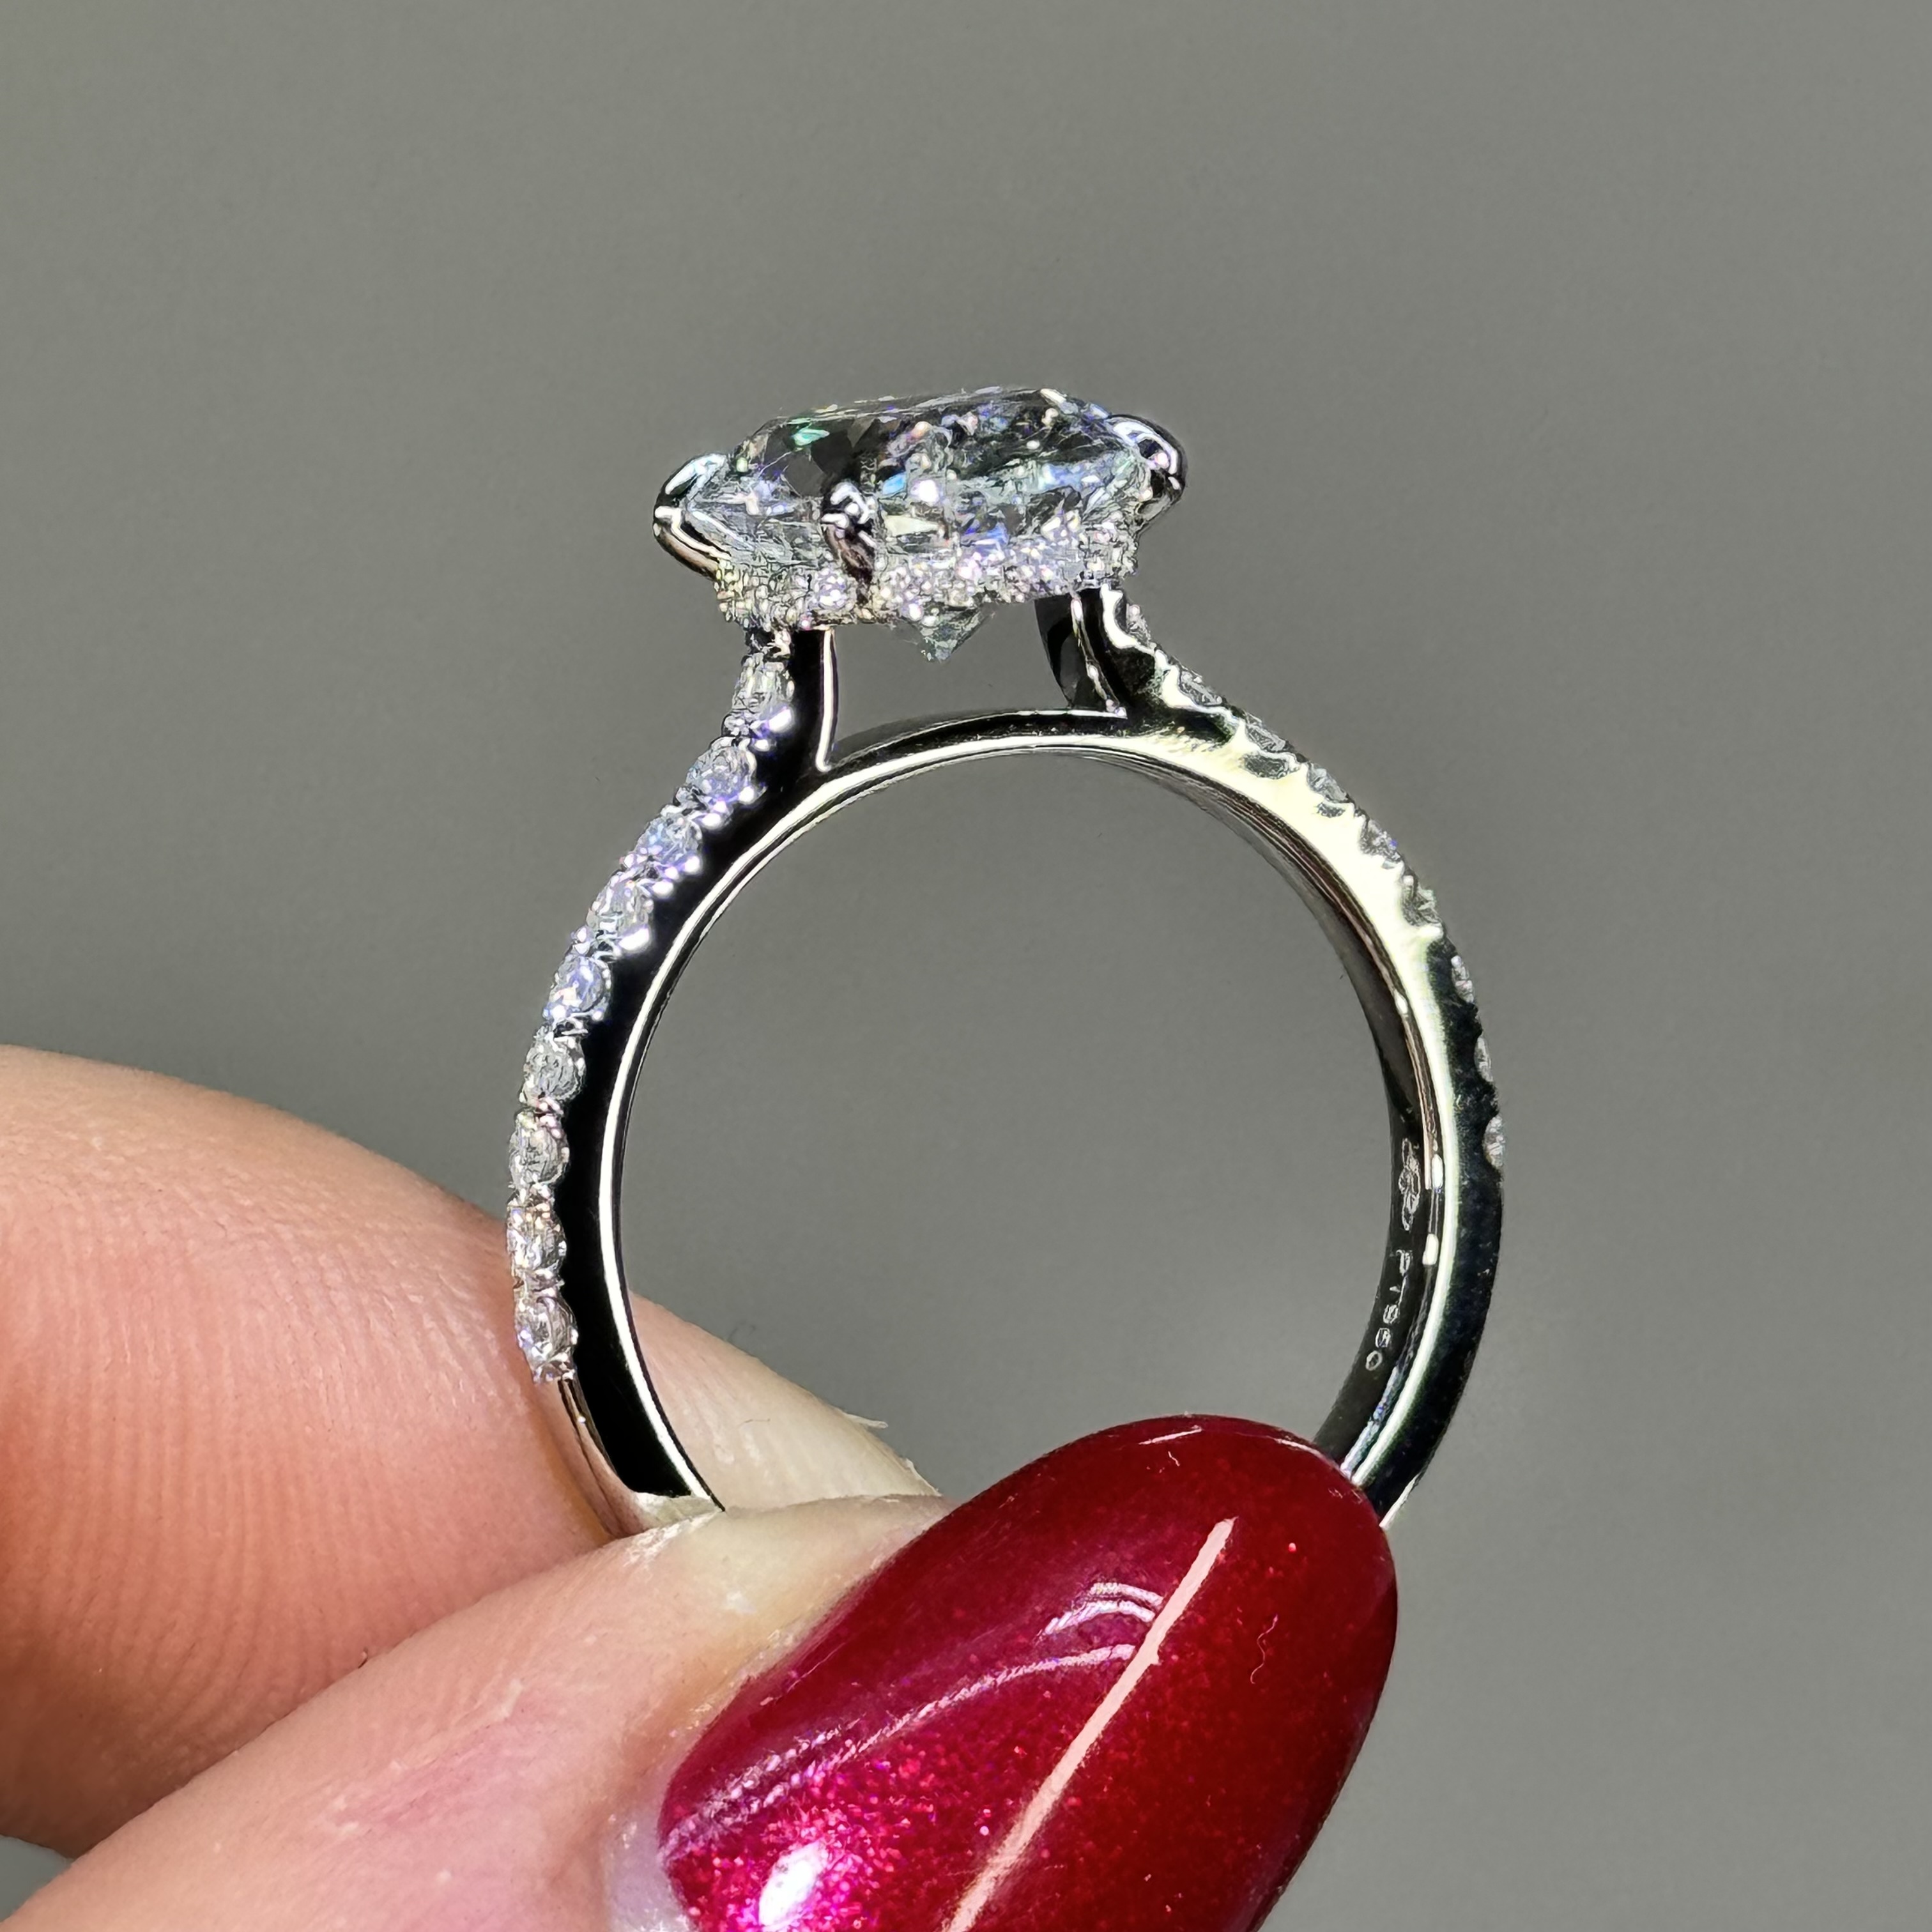 GIA 2.93ct D VS1 Oval "Carrie" Engagement Ring Image 4 Forever Diamonds New York, NY